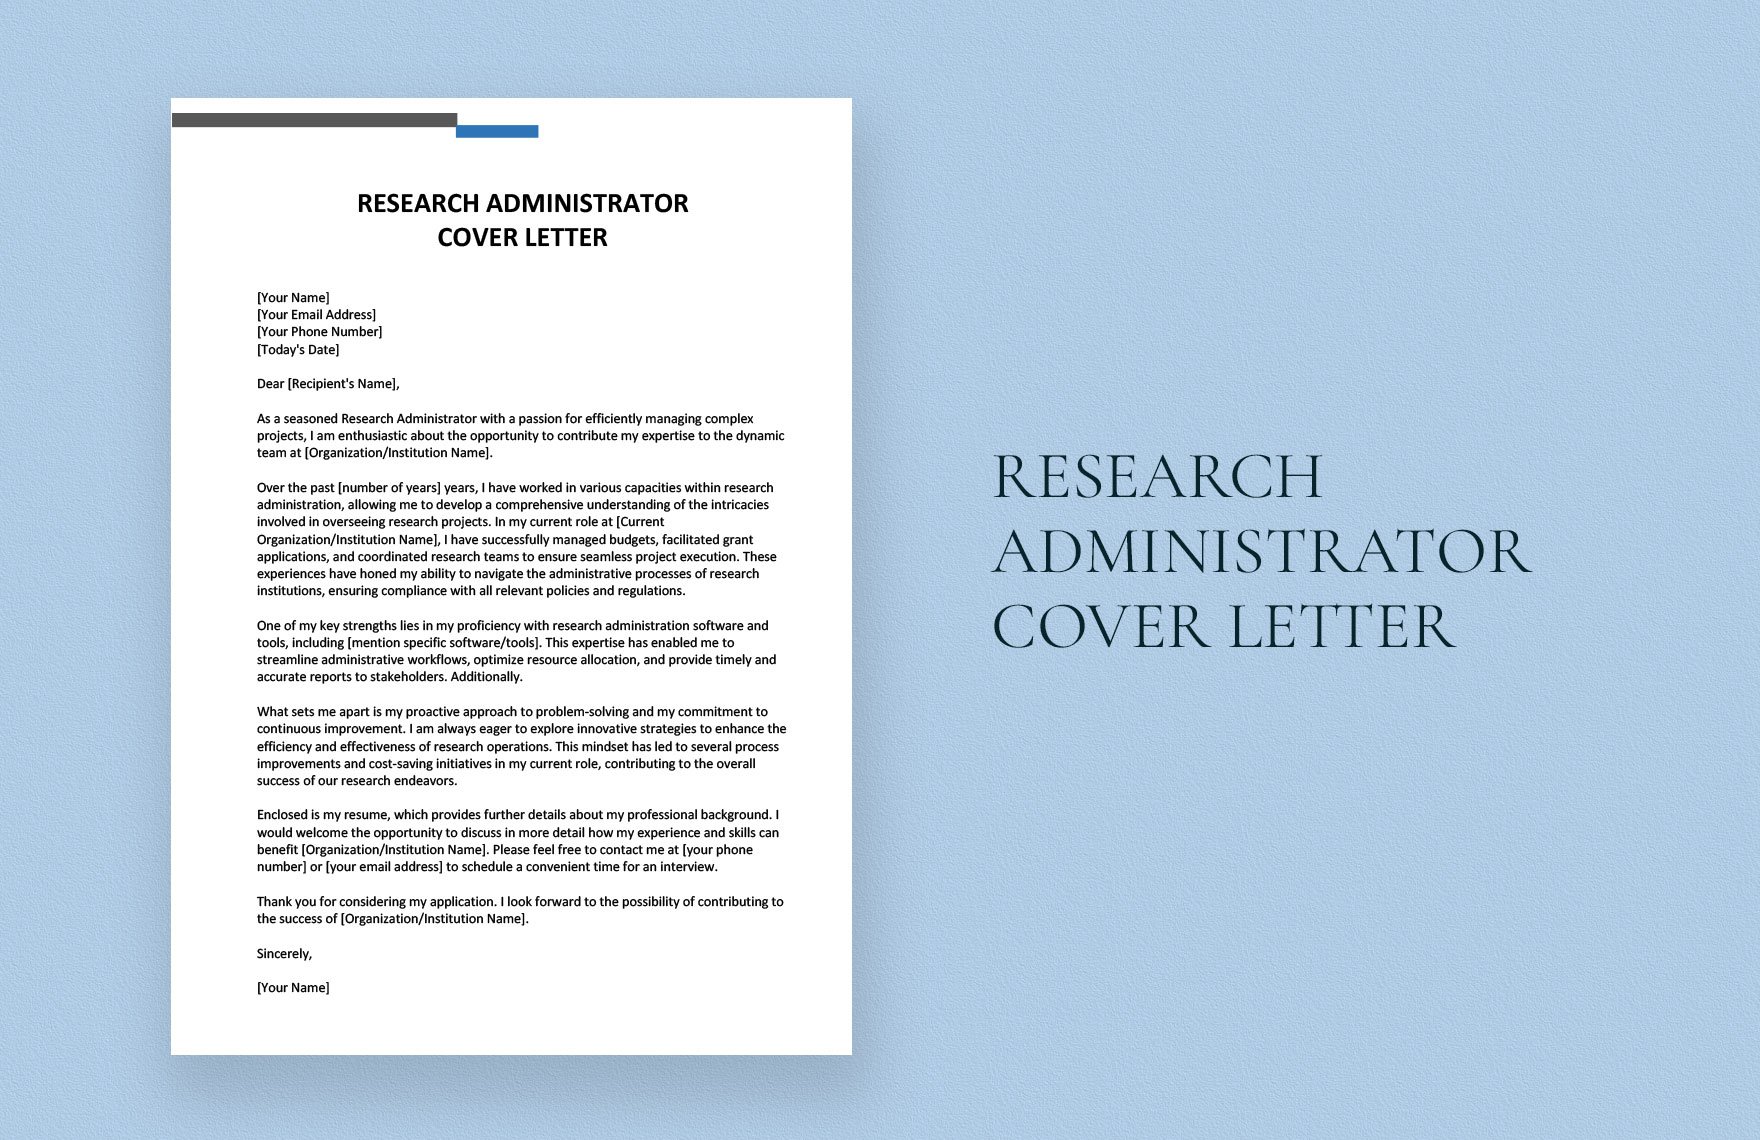 Research Administrator Cover Letter